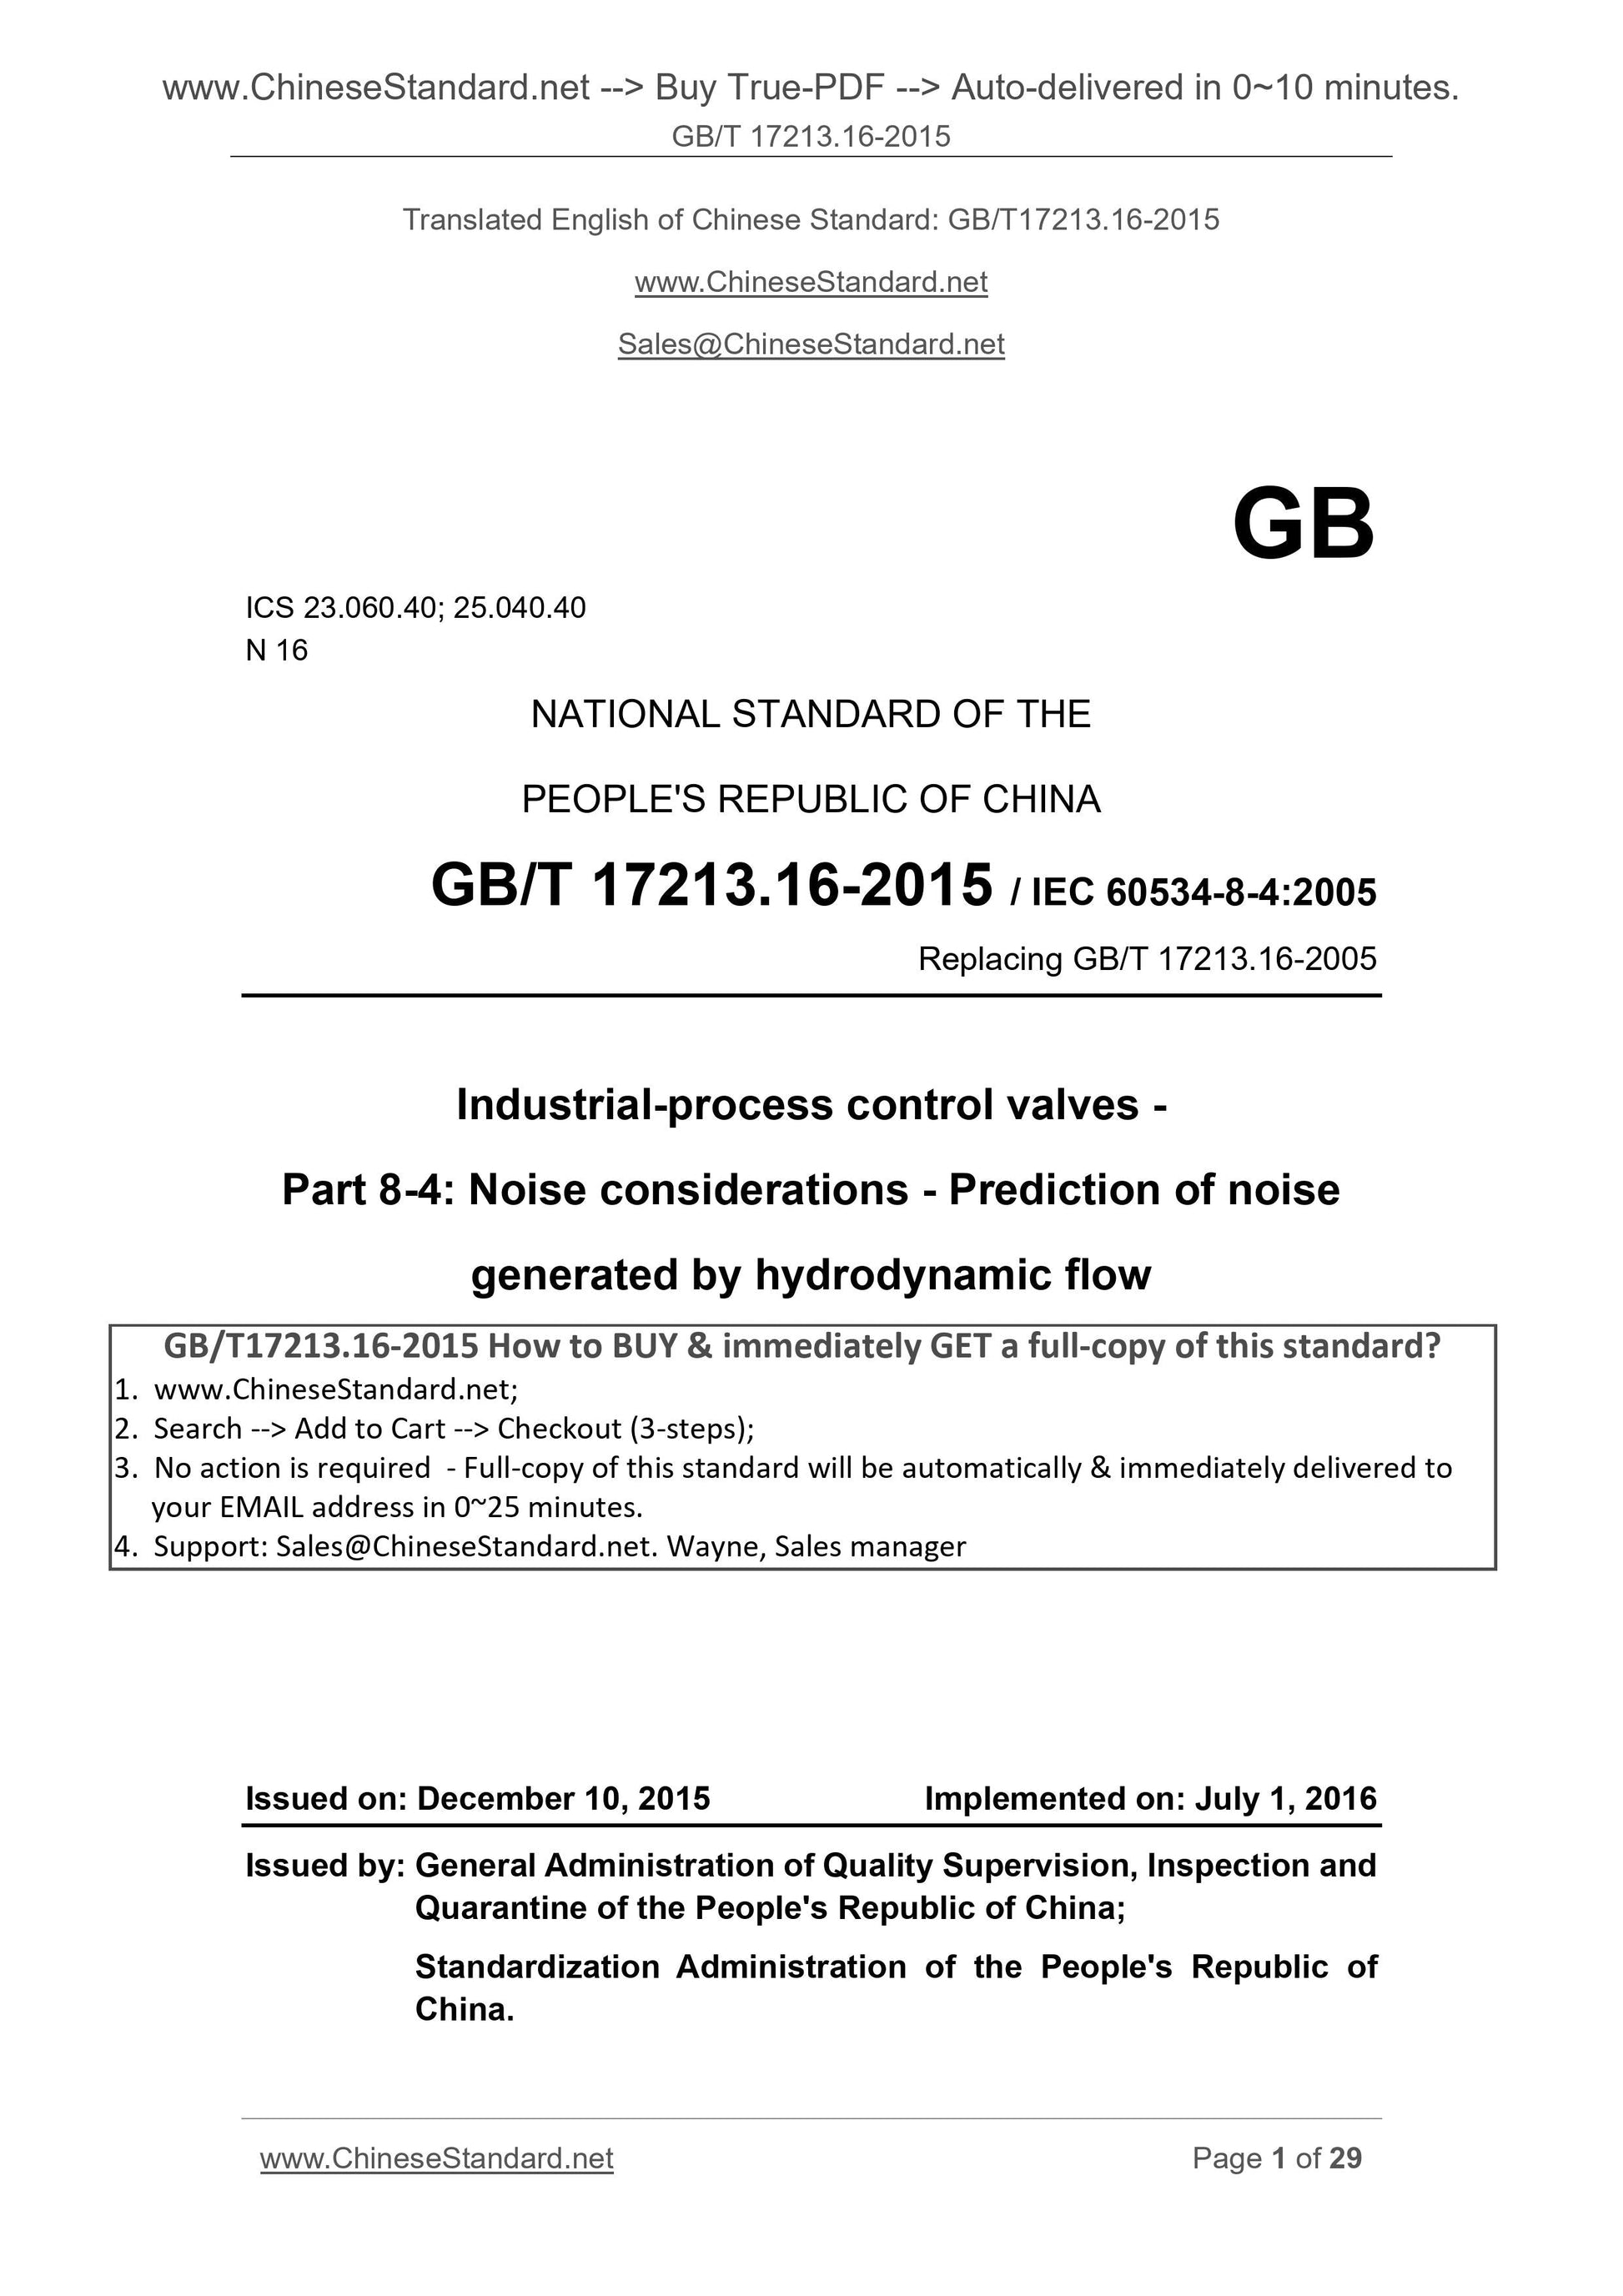 GB/T 17213.16-2015 Page 1